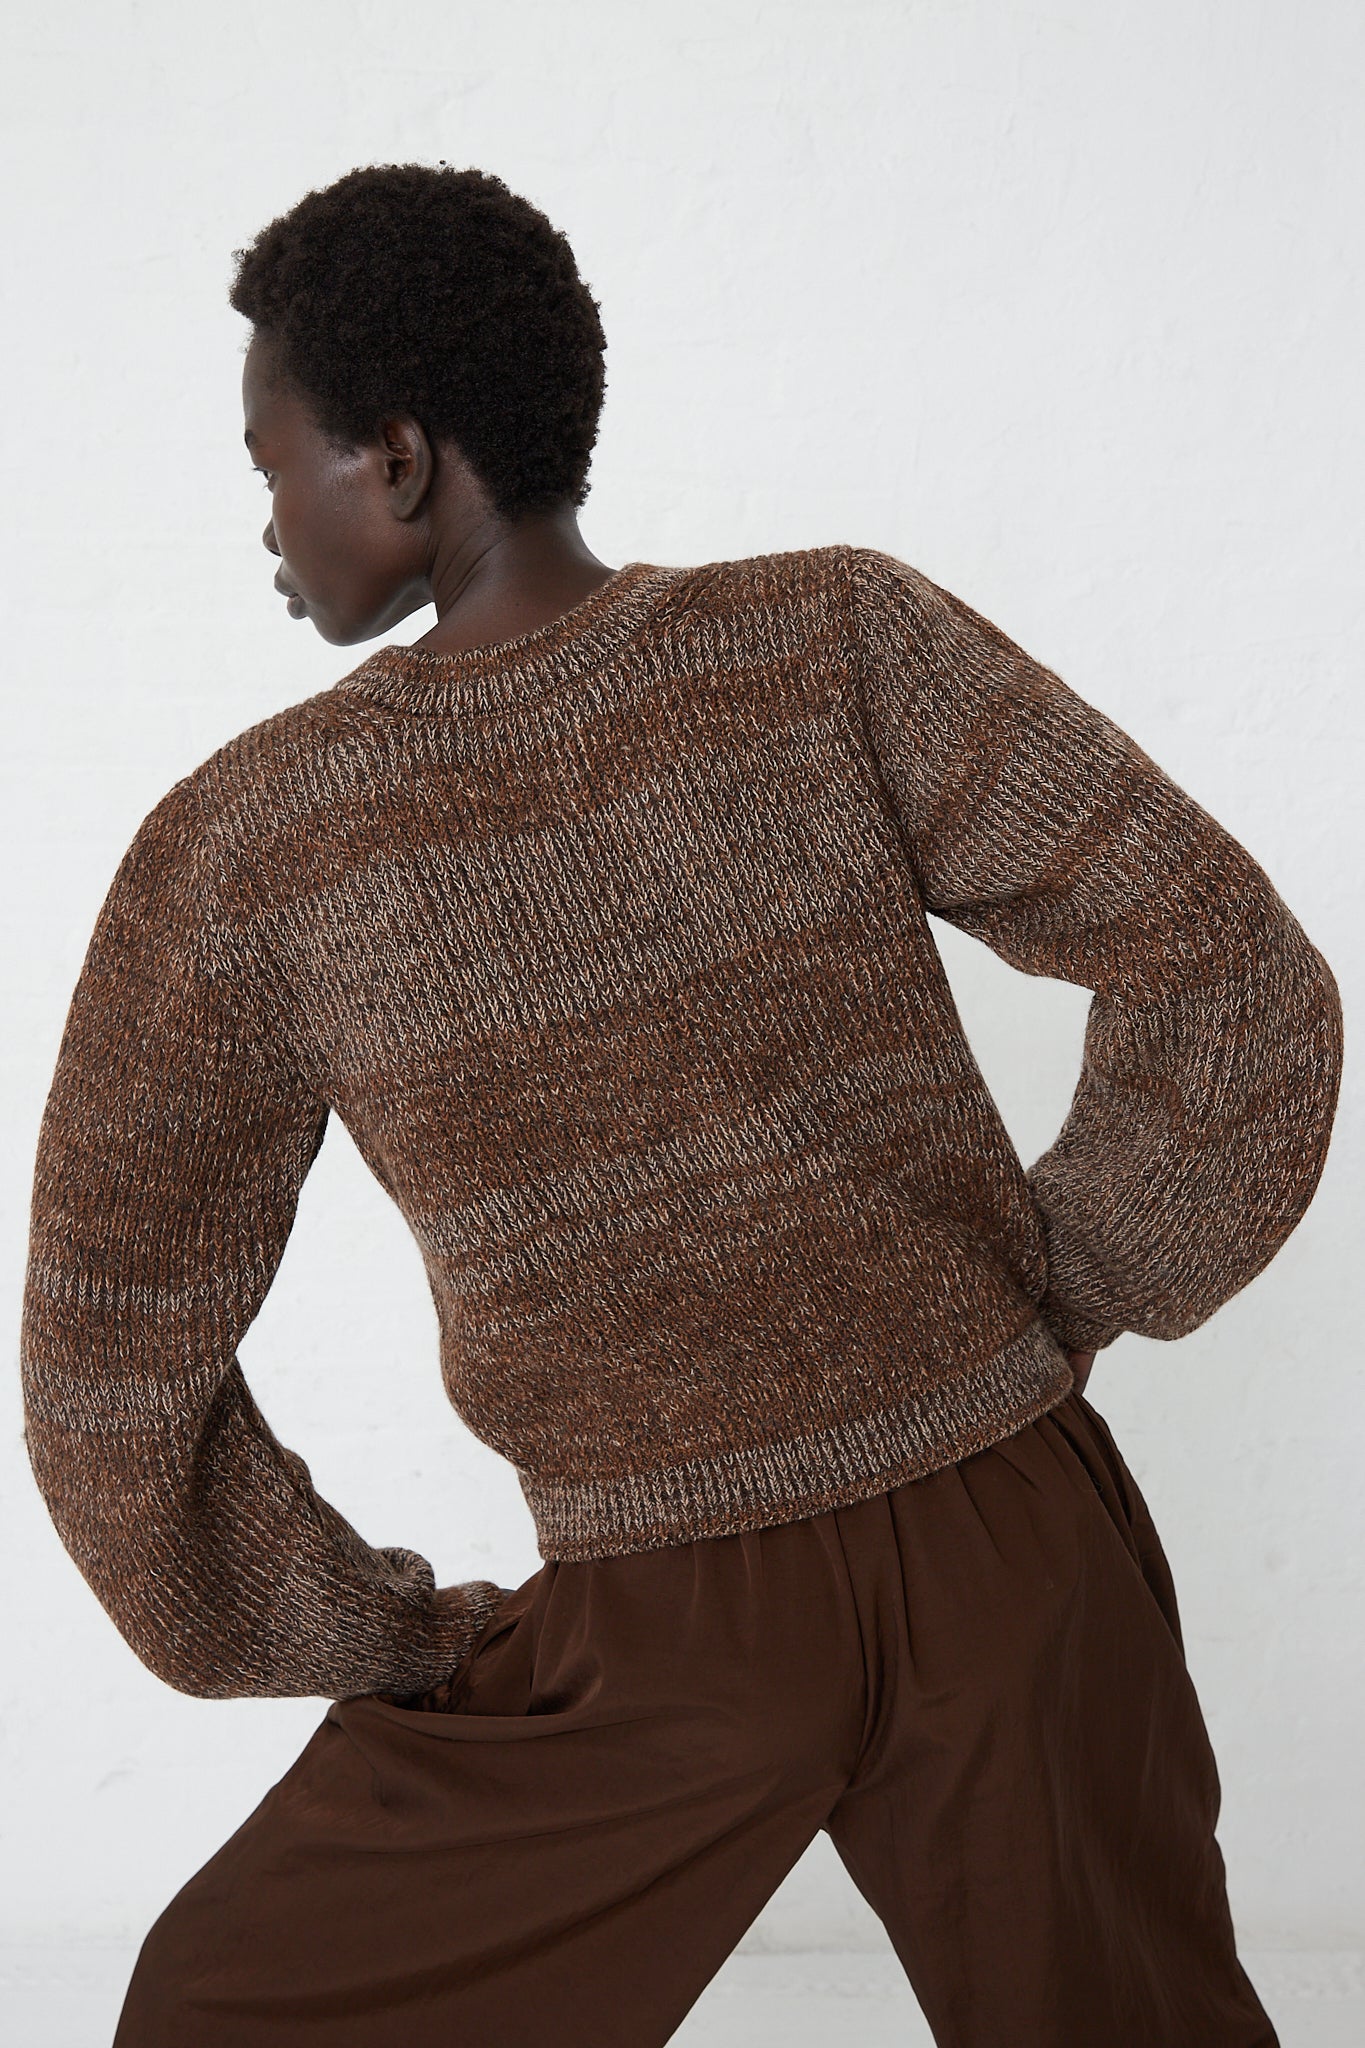 A woman wearing a Veronique Leroy Curved Sleeve Sweater in Oak made of virgin wool.